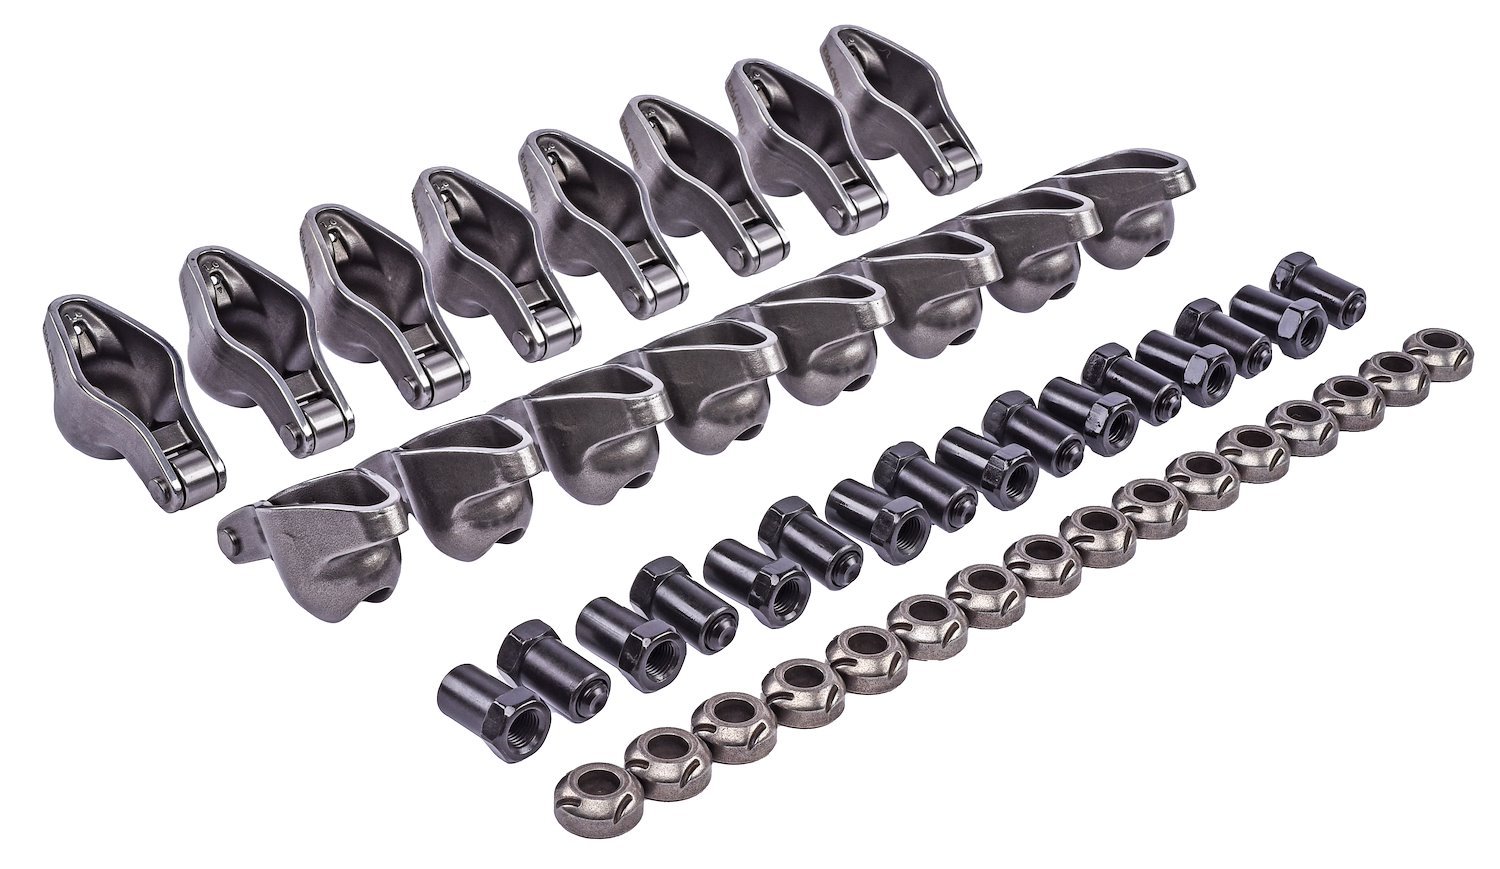 Cast Steel Roller Tip Rocker Arms for 1955-1986 Small Block Chevy [Set of 16]